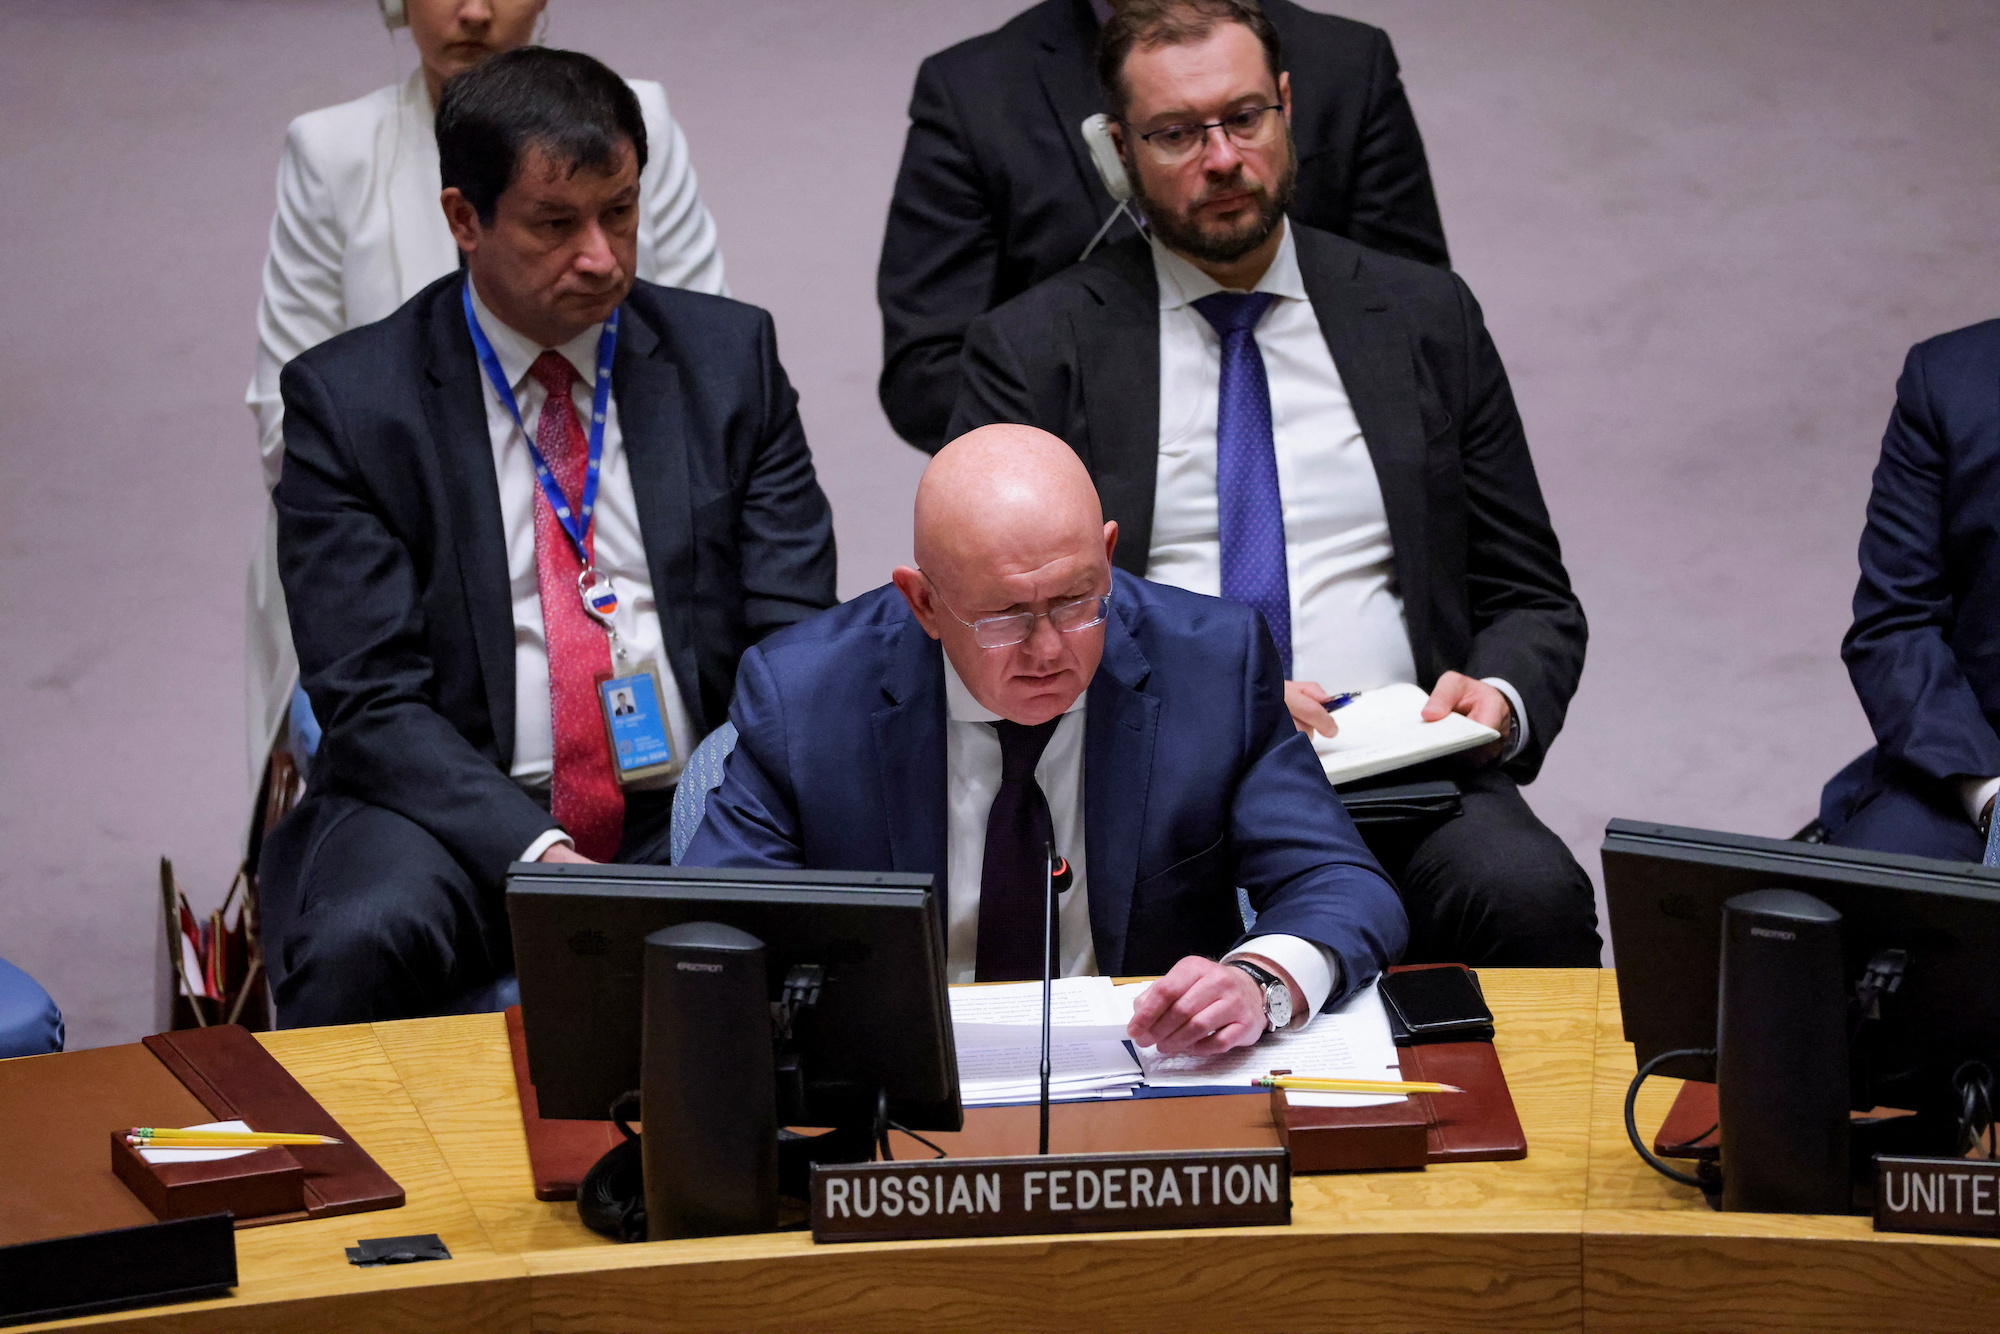 Russian Ambassador to the UN Vasily Nebenzya speaks at a Security Council meetting in September.